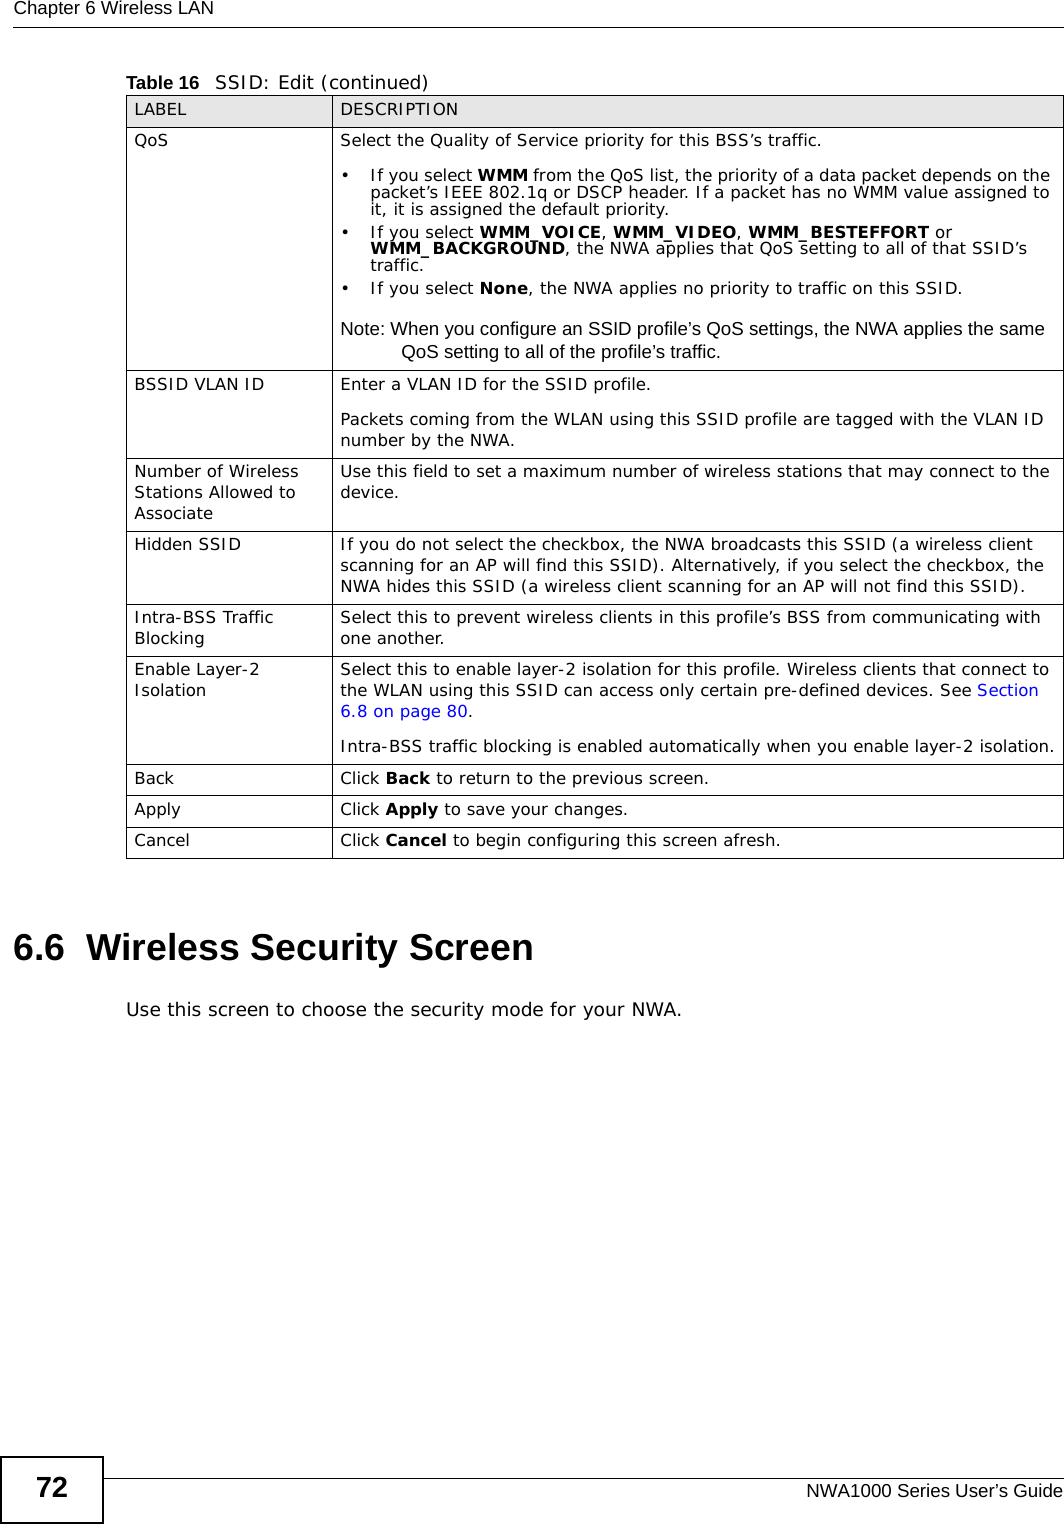 Chapter 6 Wireless LANNWA1000 Series User’s Guide726.6  Wireless Security ScreenUse this screen to choose the security mode for your NWA. QoS Select the Quality of Service priority for this BSS’s traffic. • If you select WMM from the QoS list, the priority of a data packet depends on the packet’s IEEE 802.1q or DSCP header. If a packet has no WMM value assigned to it, it is assigned the default priority.•If you select WMM_VOICE, WMM_VIDEO, WMM_BESTEFFORT or WMM_BACKGROUND, the NWA applies that QoS setting to all of that SSID’s traffic. •If you select None, the NWA applies no priority to traffic on this SSID. Note: When you configure an SSID profile’s QoS settings, the NWA applies the same QoS setting to all of the profile’s traffic.BSSID VLAN ID Enter a VLAN ID for the SSID profile.Packets coming from the WLAN using this SSID profile are tagged with the VLAN ID number by the NWA. Number of Wireless Stations Allowed to AssociateUse this field to set a maximum number of wireless stations that may connect to the device.Hidden SSID If you do not select the checkbox, the NWA broadcasts this SSID (a wireless client scanning for an AP will find this SSID). Alternatively, if you select the checkbox, the NWA hides this SSID (a wireless client scanning for an AP will not find this SSID).Intra-BSS Traffic Blocking Select this to prevent wireless clients in this profile’s BSS from communicating with one another.Enable Layer-2 Isolation  Select this to enable layer-2 isolation for this profile. Wireless clients that connect to the WLAN using this SSID can access only certain pre-defined devices. See Section 6.8 on page 80.Intra-BSS traffic blocking is enabled automatically when you enable layer-2 isolation.Back Click Back to return to the previous screen.Apply Click Apply to save your changes.Cancel Click Cancel to begin configuring this screen afresh.Table 16   SSID: Edit (continued)LABEL DESCRIPTION